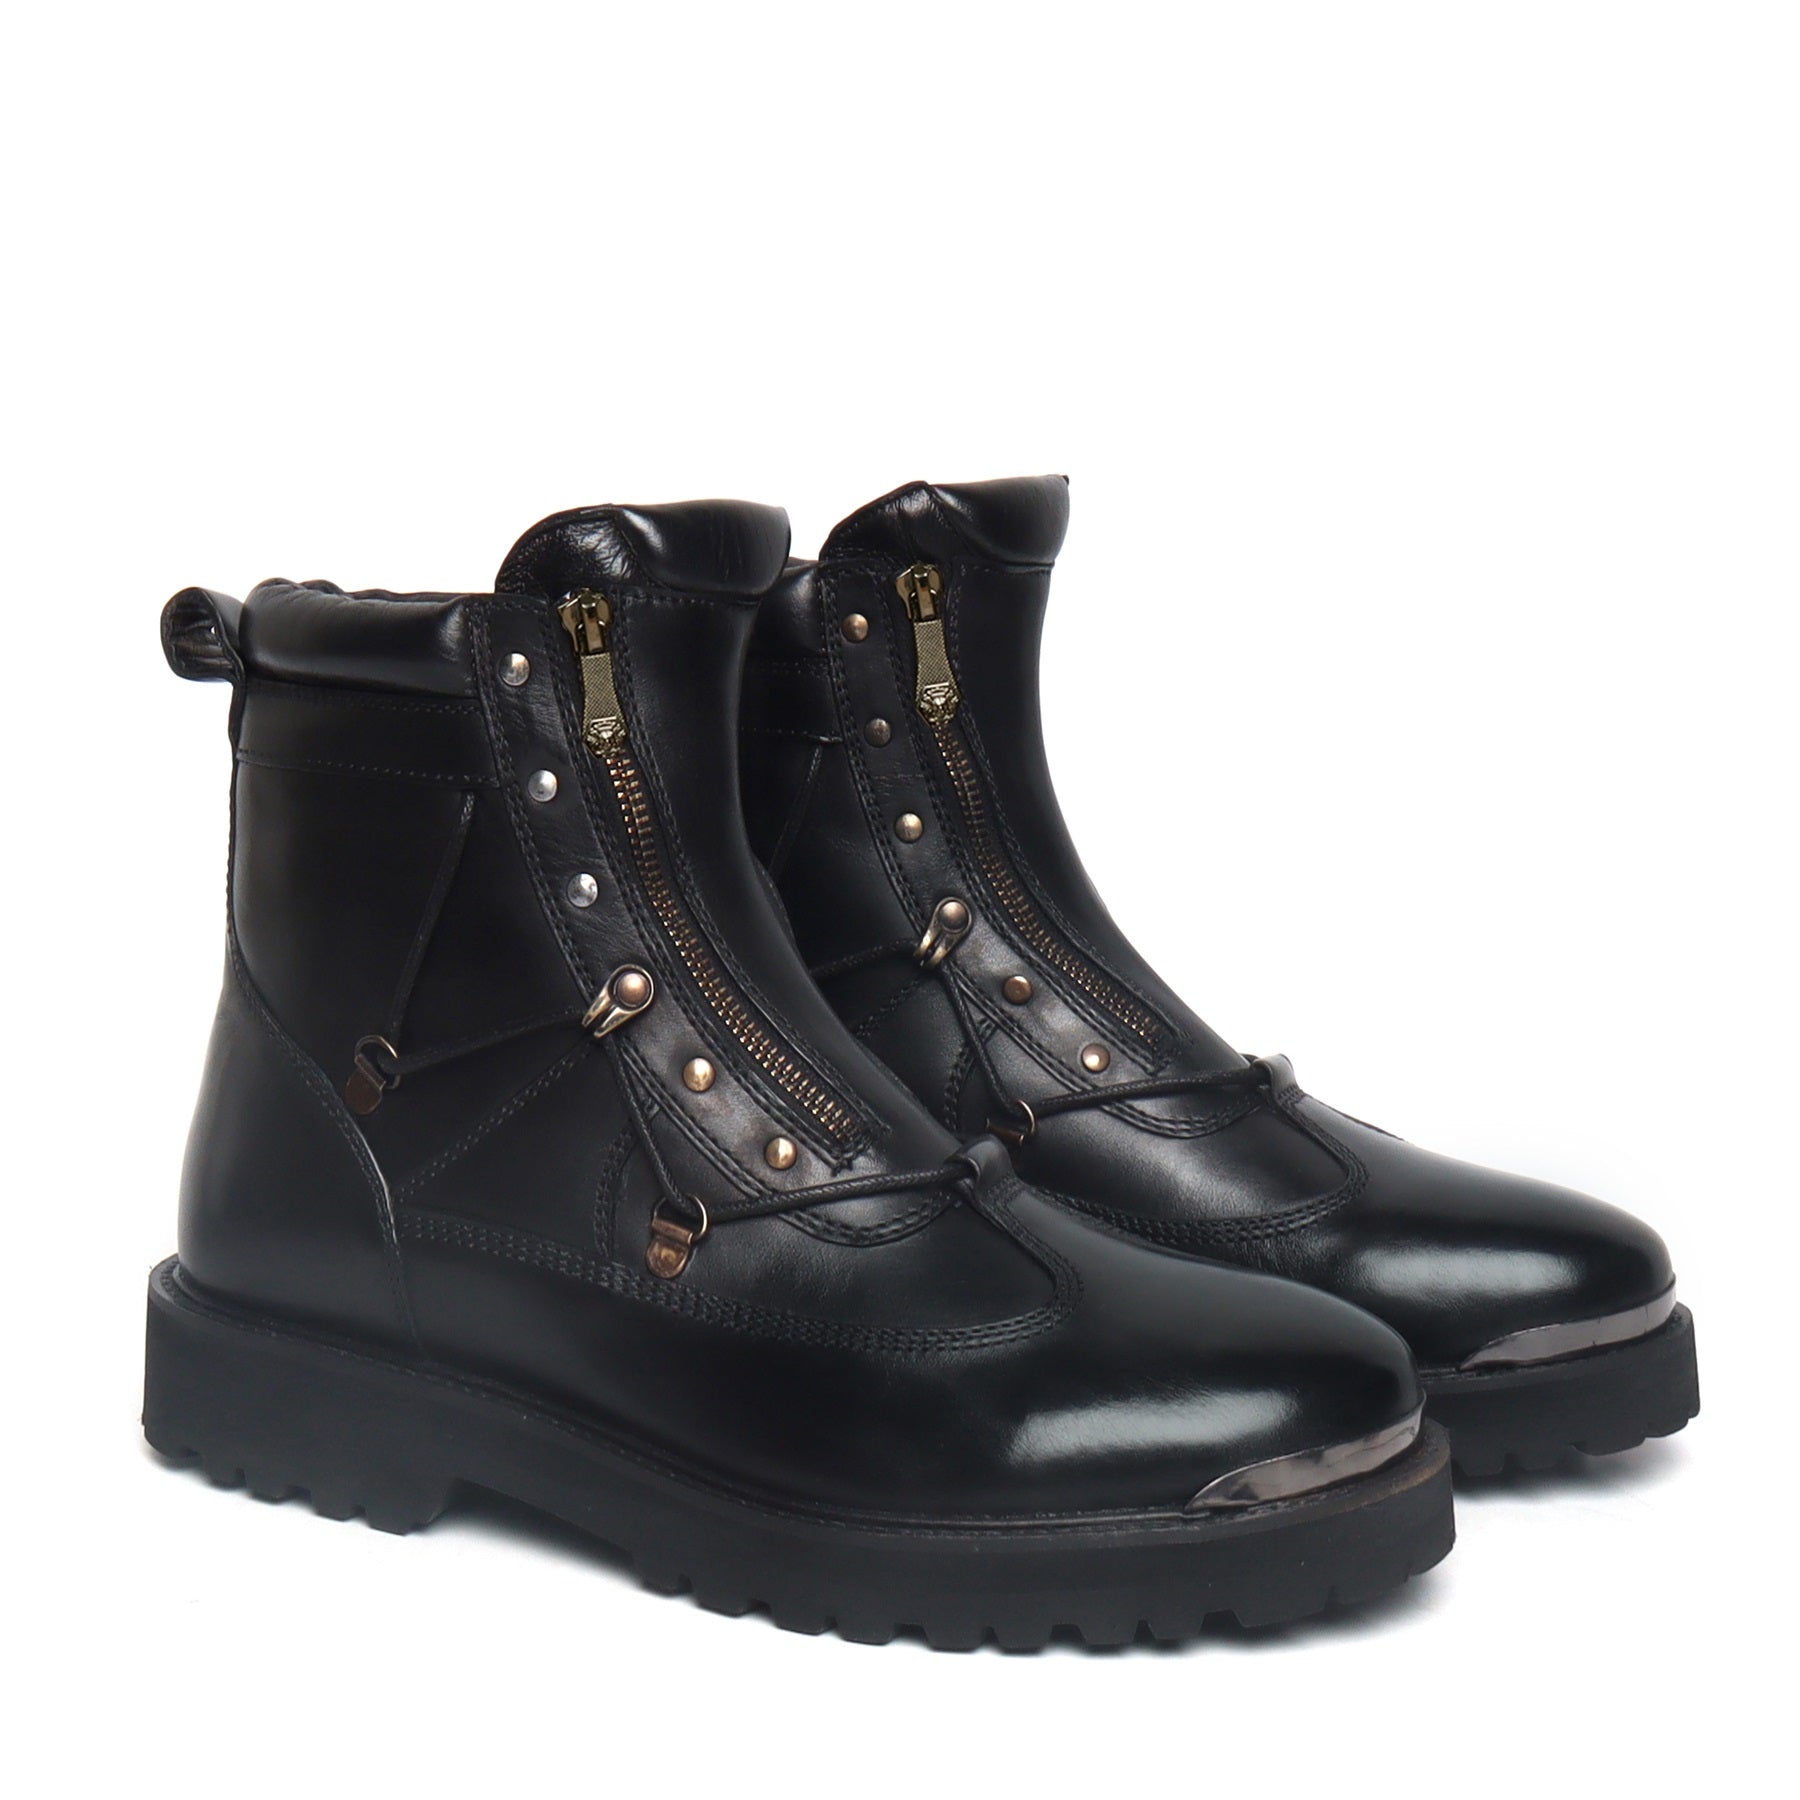 Black Chunky Boot With New Shape With Metal Plate On Toe